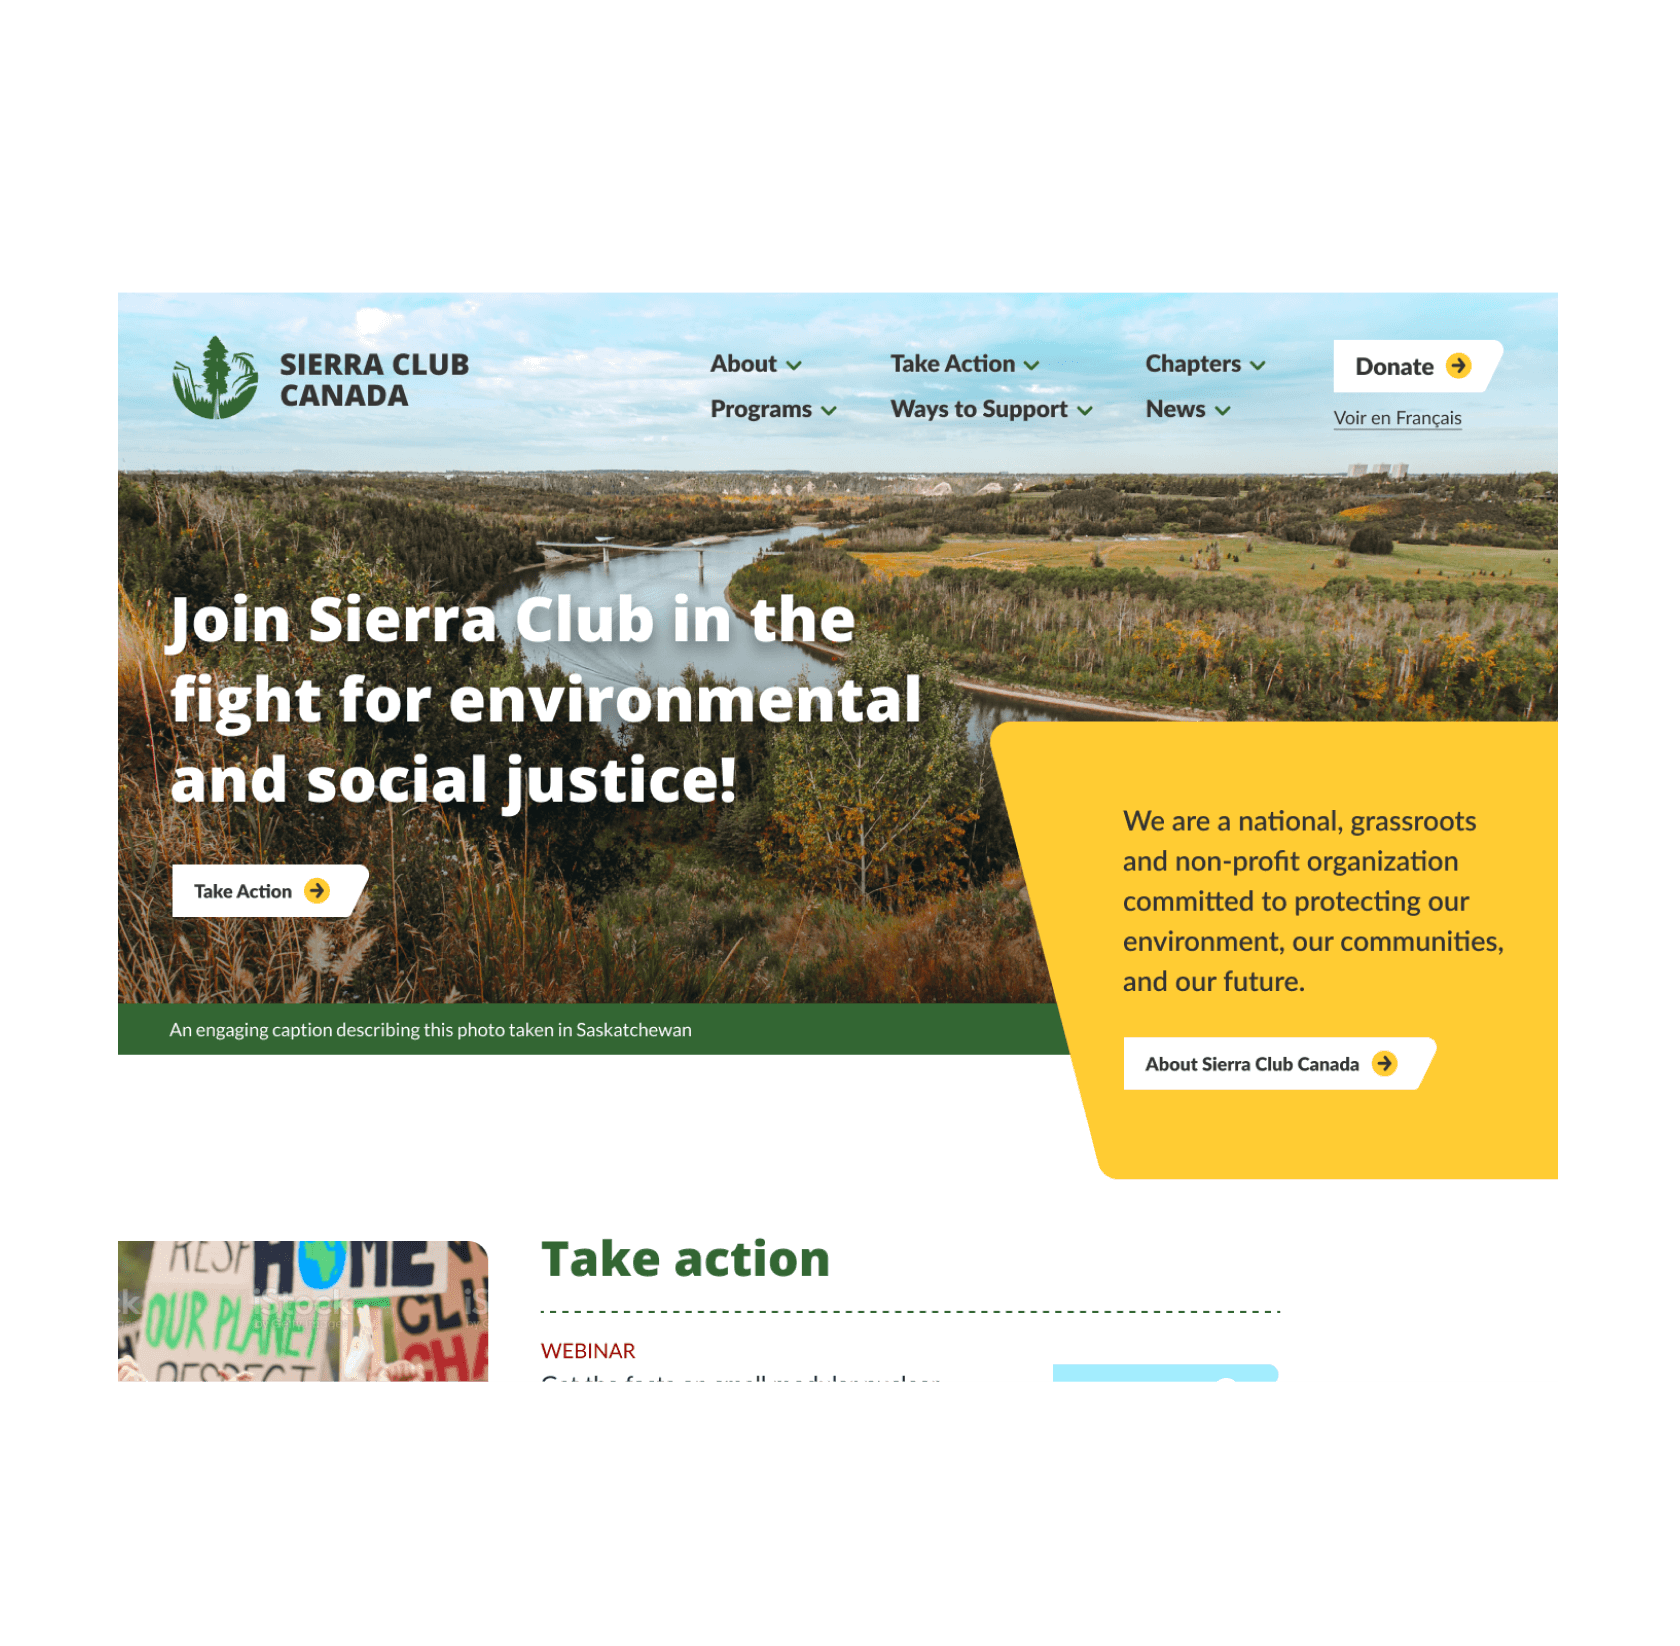 Sierra Club's homepage, featuring real photos taken in Canada.